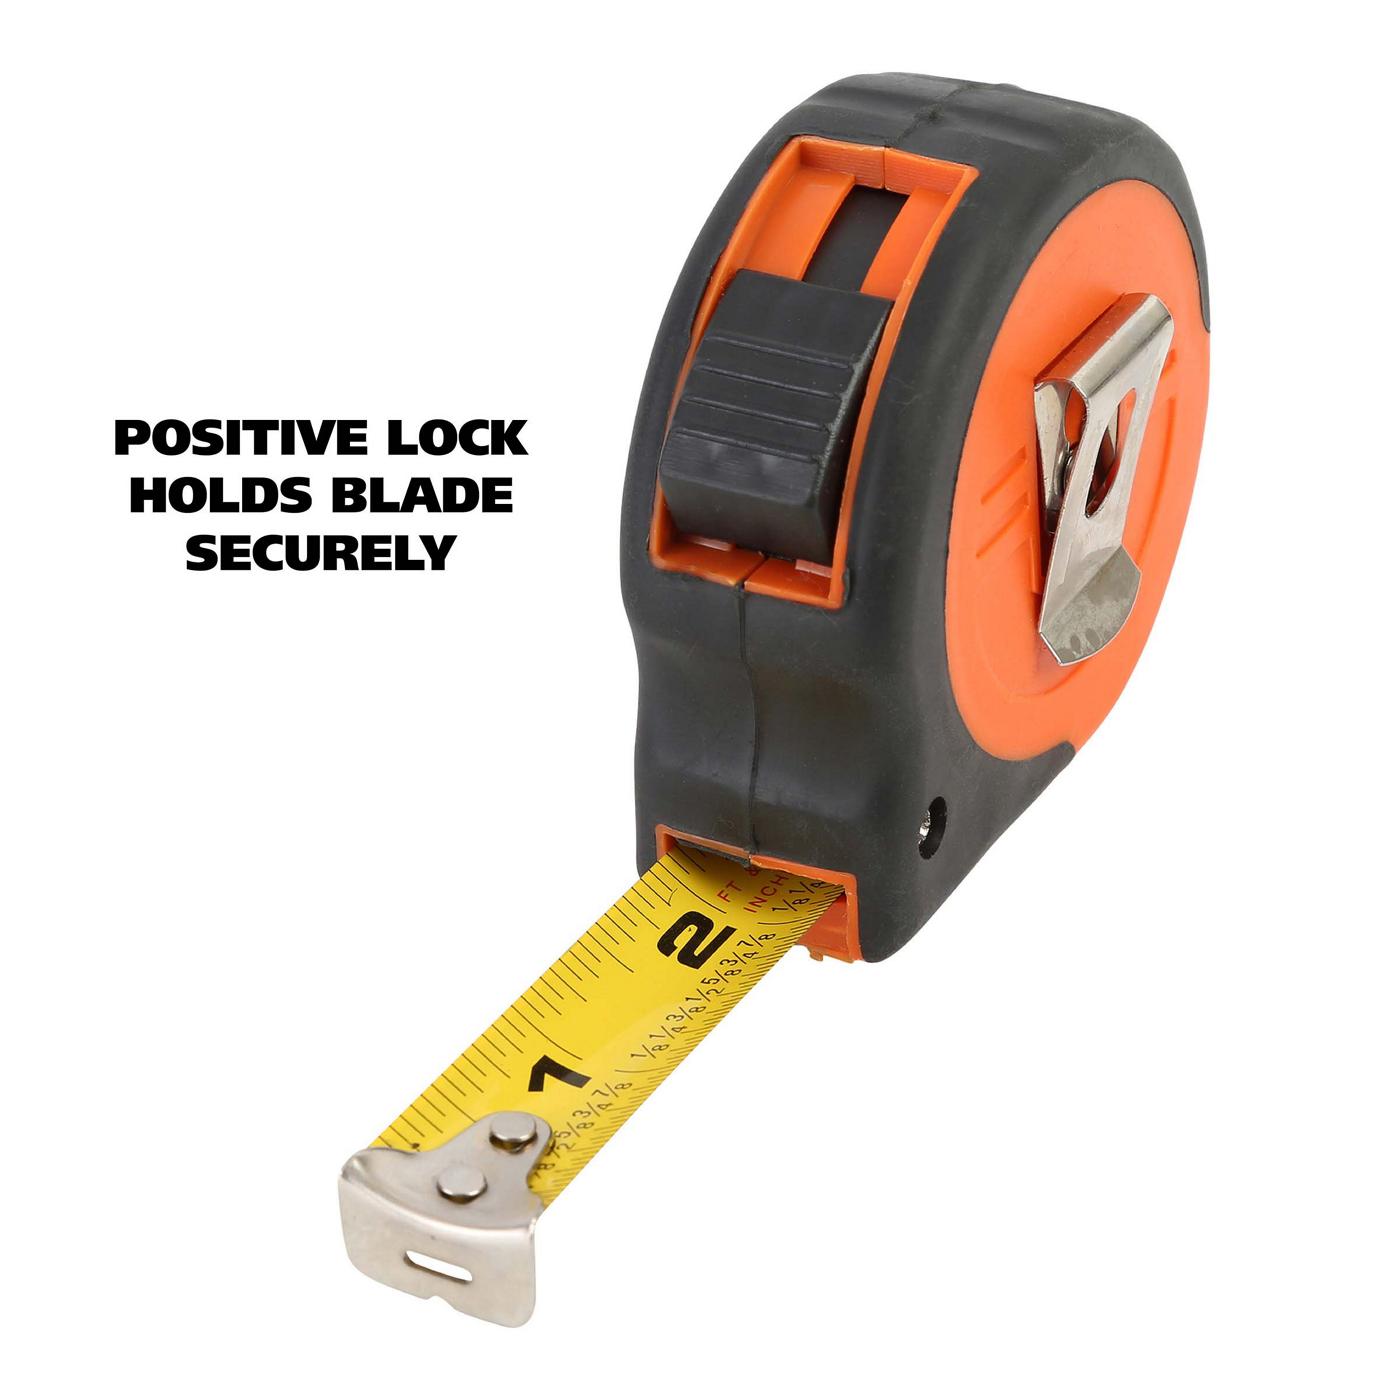 Singer Sewing Retractable Tape Measure - Shop Sewing at H-E-B